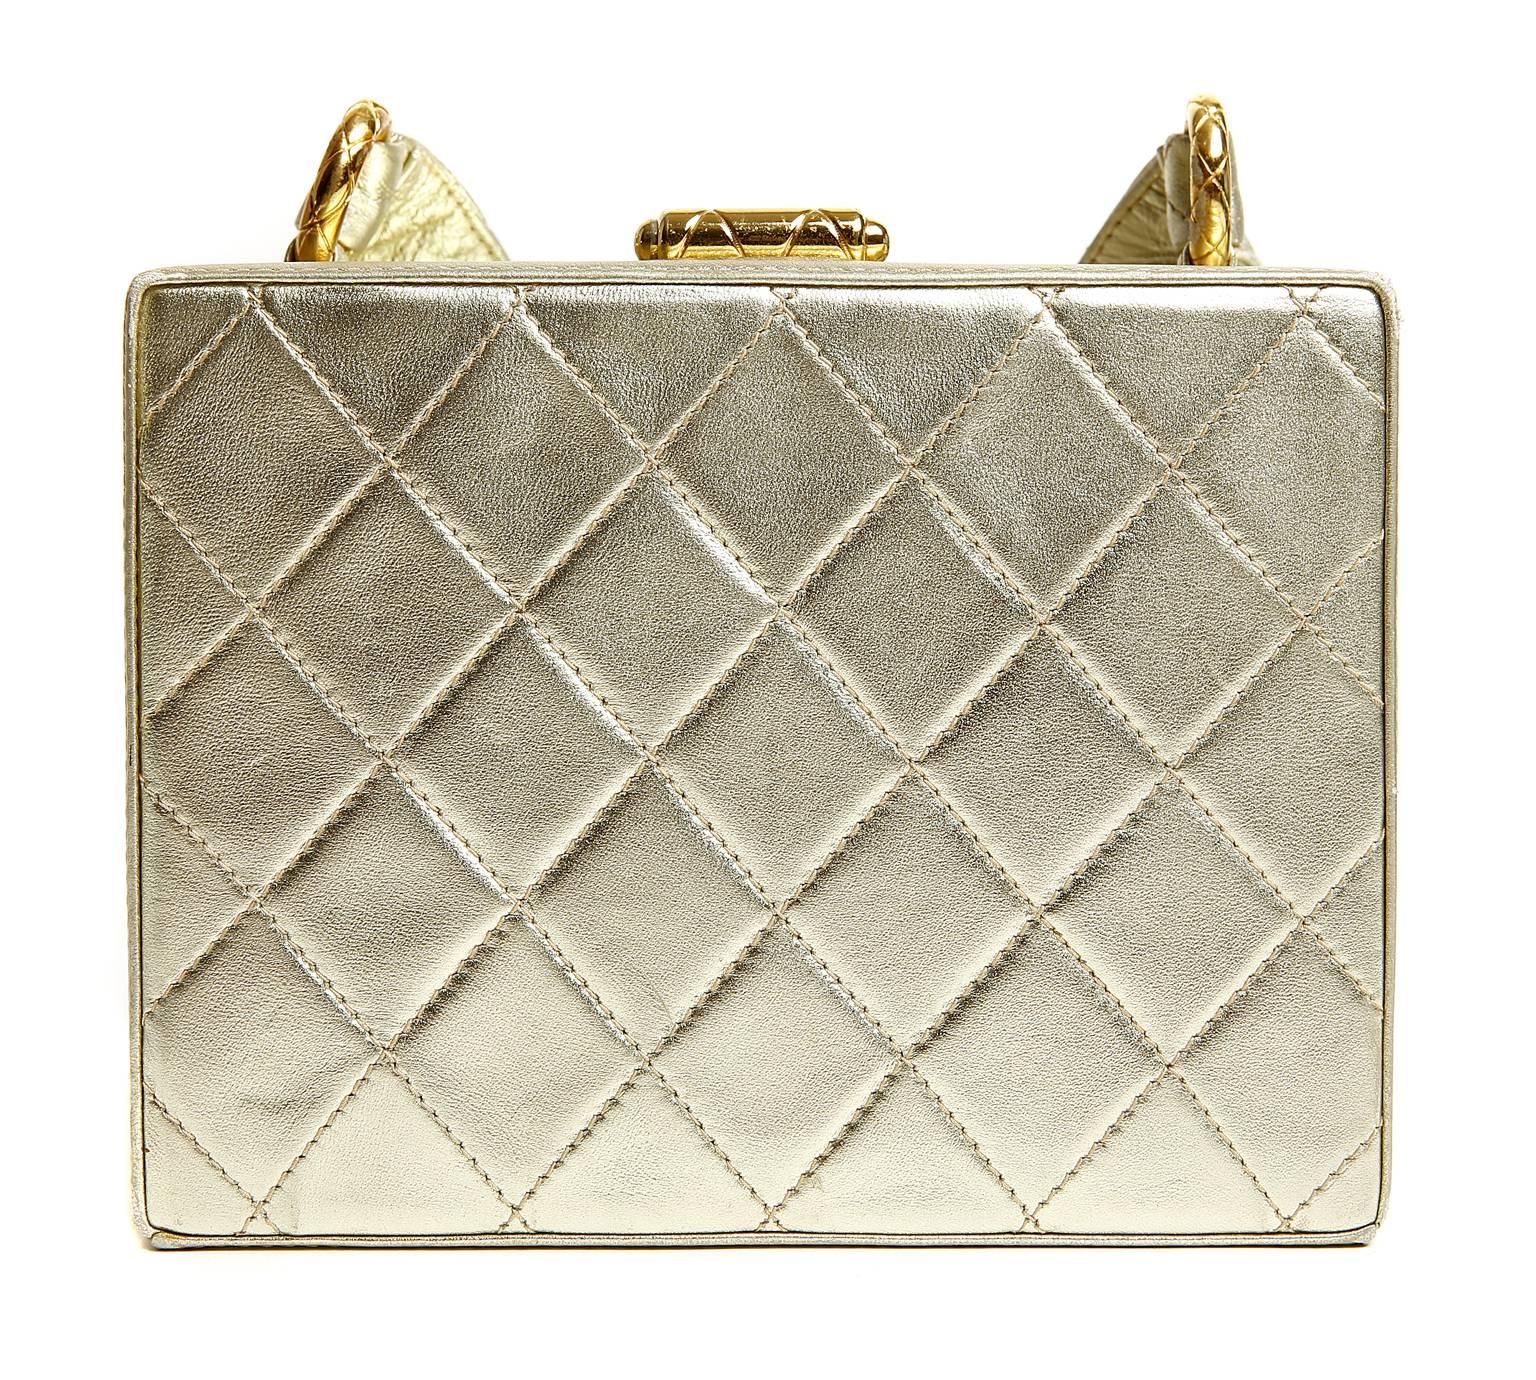 Chanel Platinum Leather Box Bag- nearly pristine condition
 The soft metallic complements any other color and the unique silhouette can be either formal or edgy, depending on the setting.
 
Platinum gold leather box shaped bag is quilted in